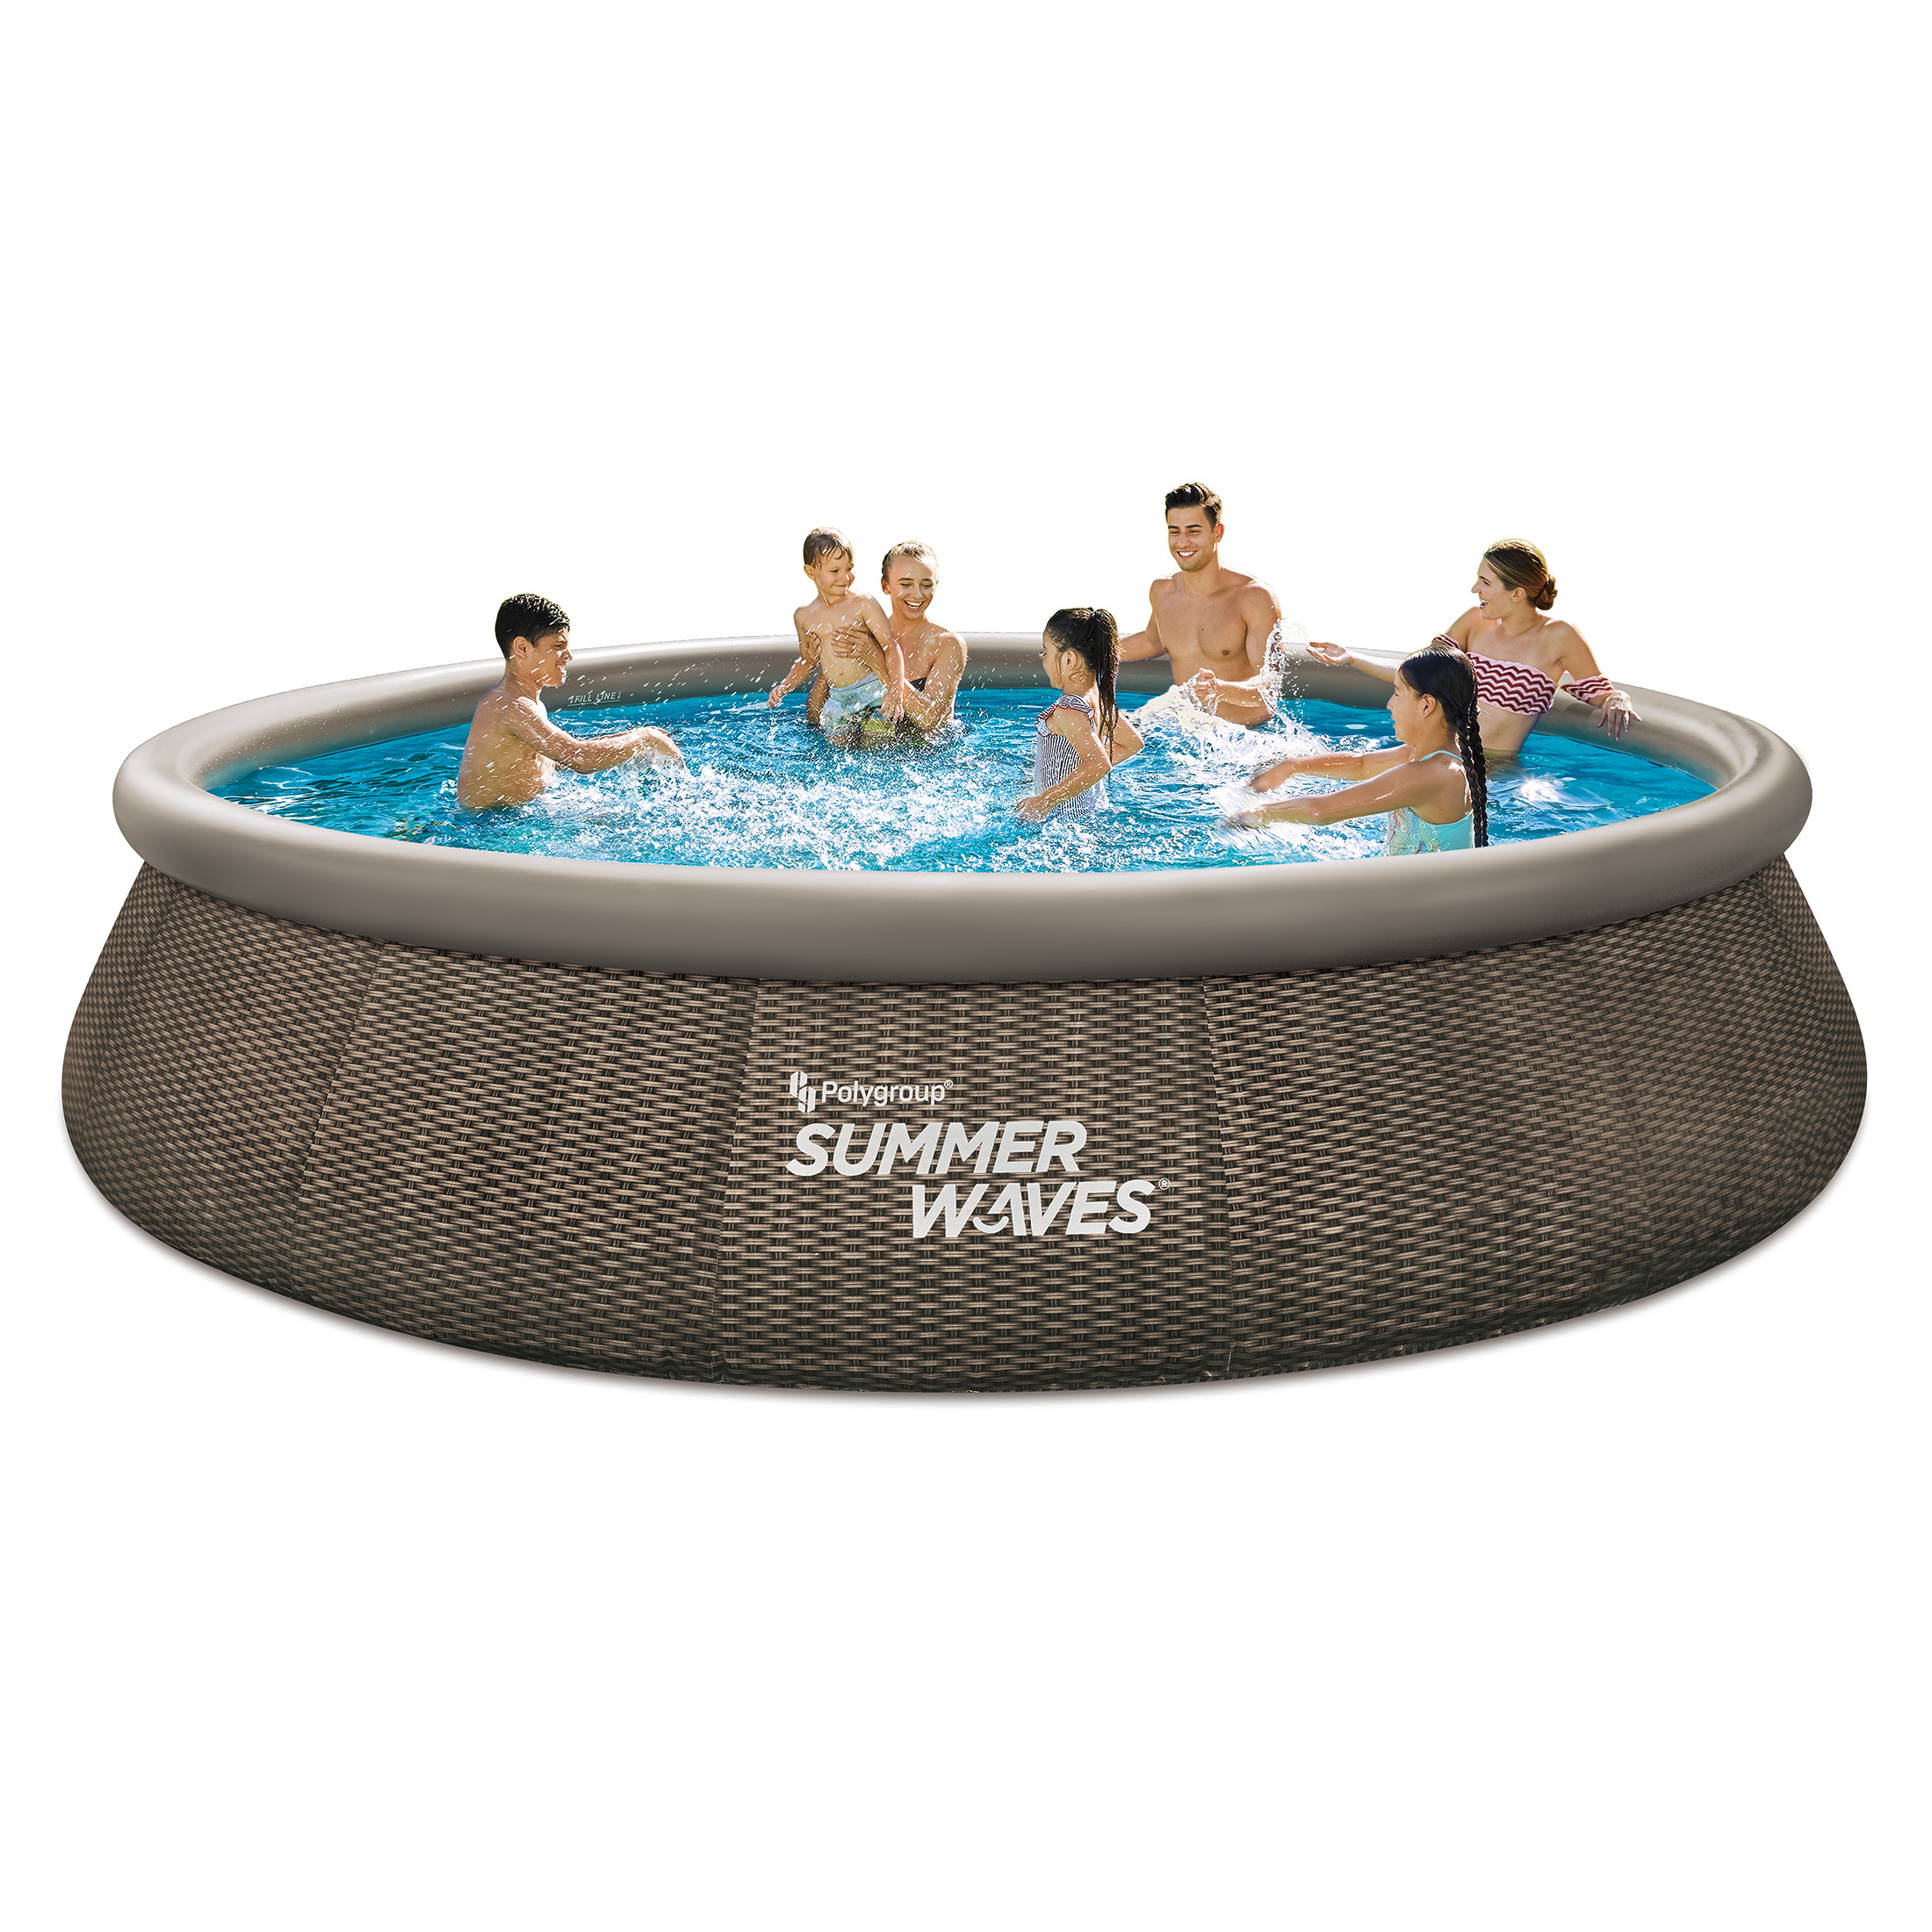 Summer Waves 15 ft Dark Double Rattan Quick Set Pool, Round, Ages 6+, Unisex - image 2 of 5